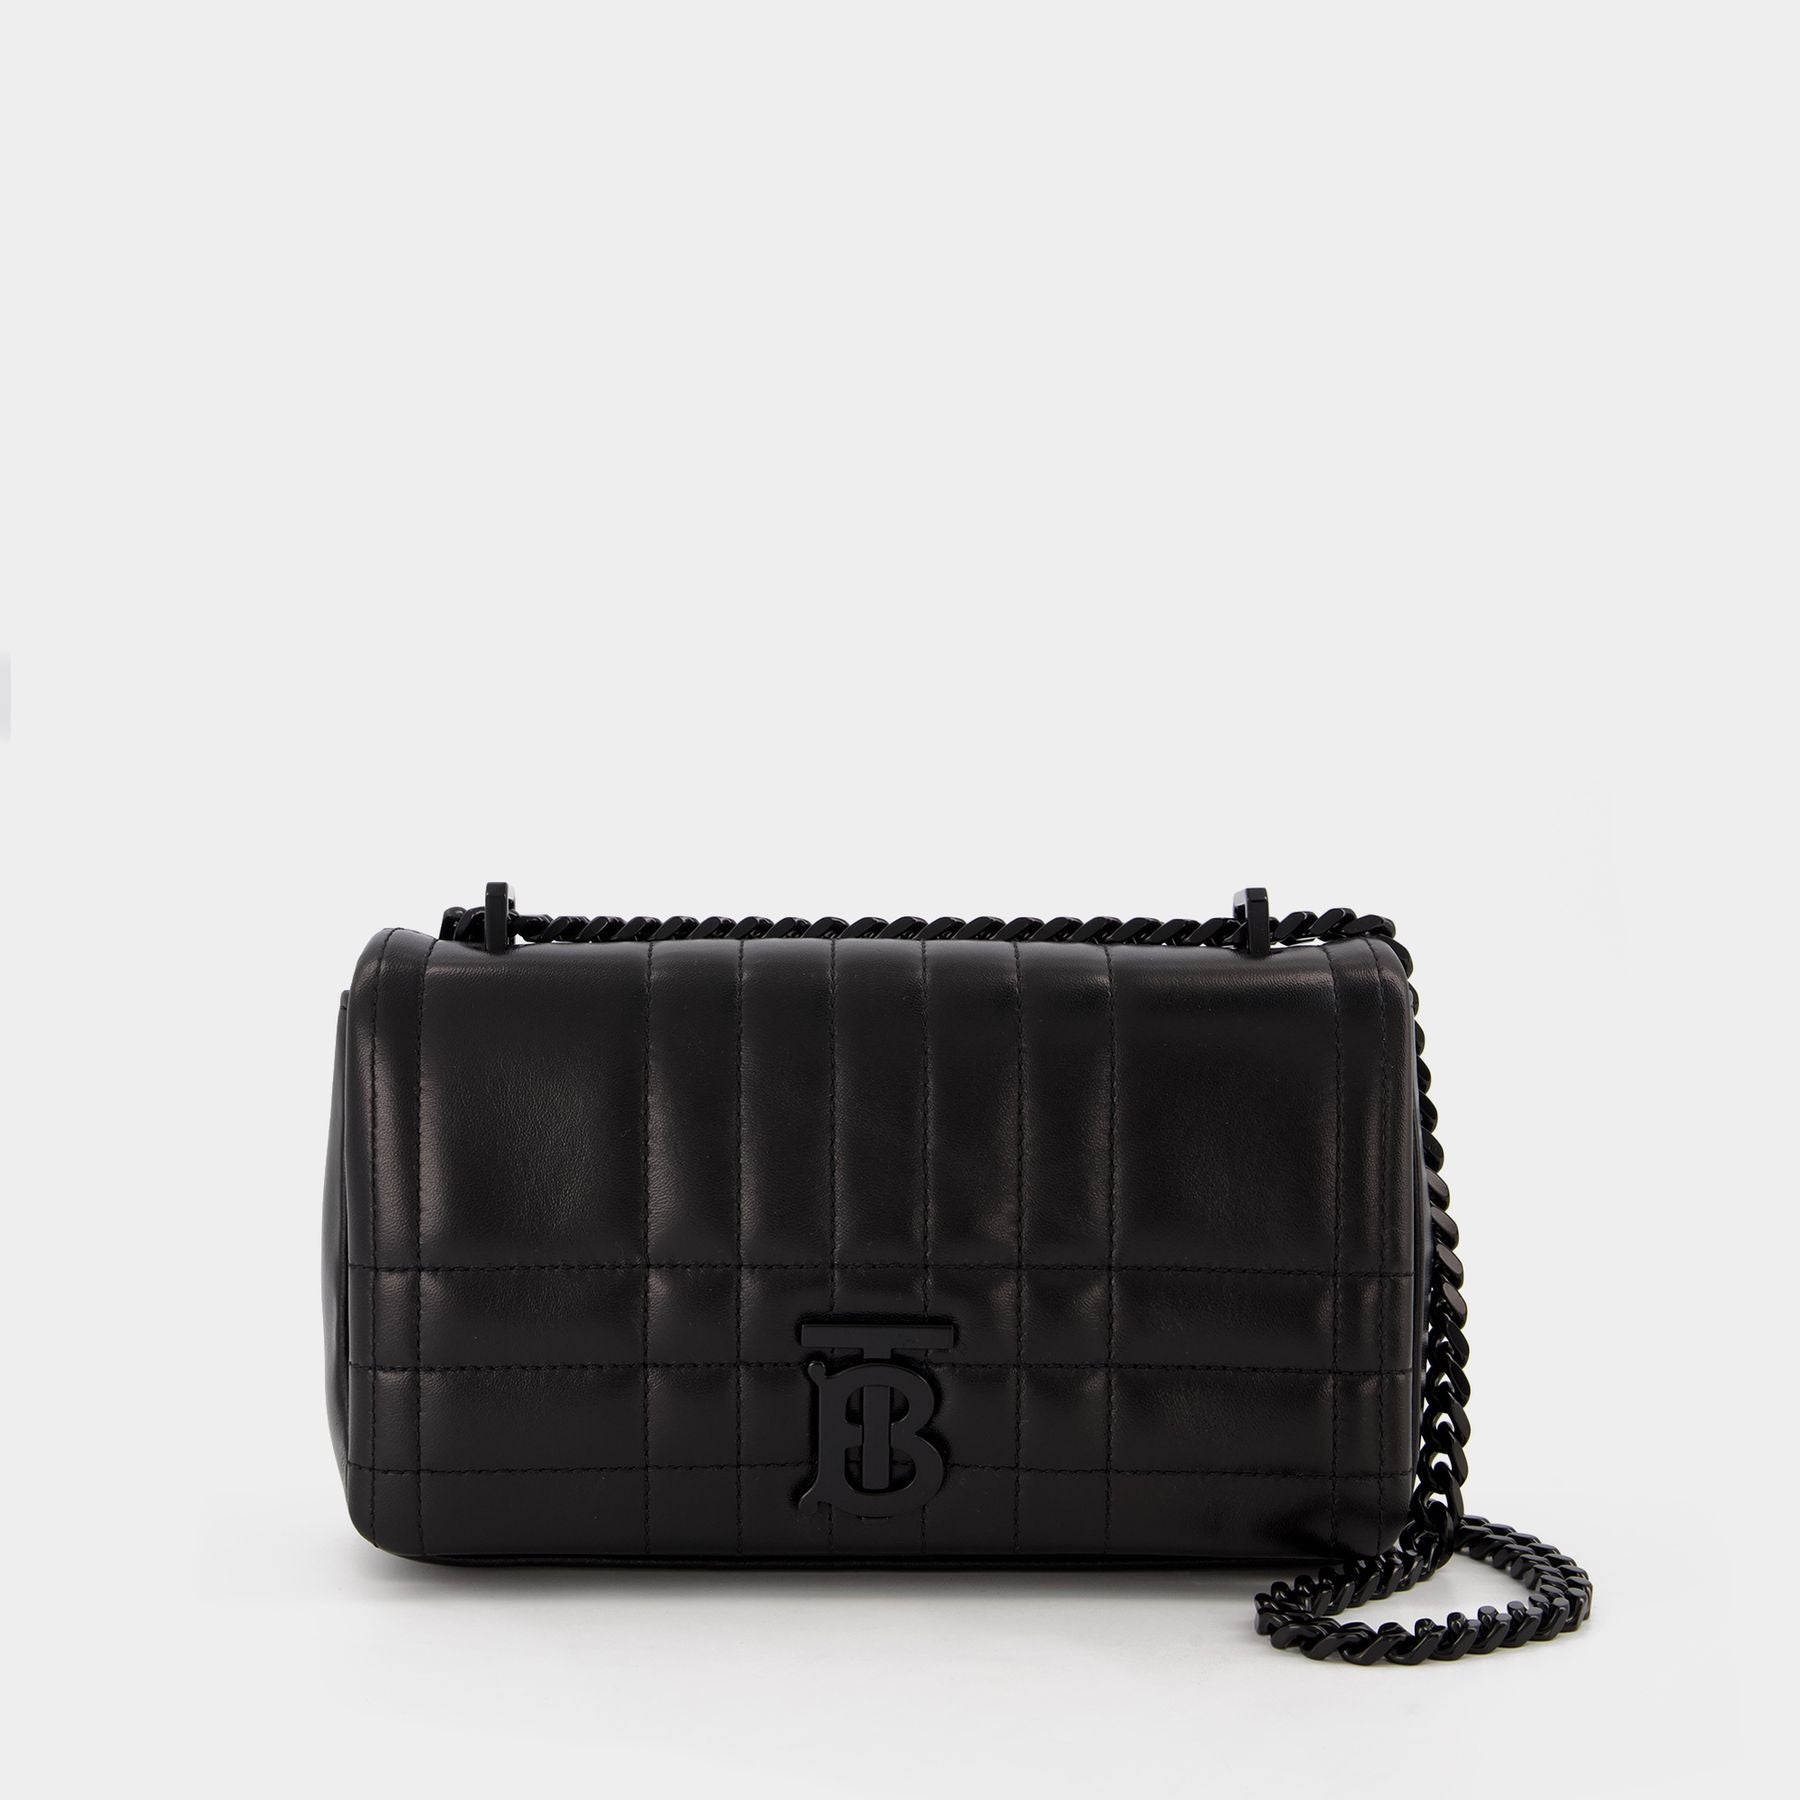 Lola Black Leather Clutch or Belt Bag – Mexico In My Pocket